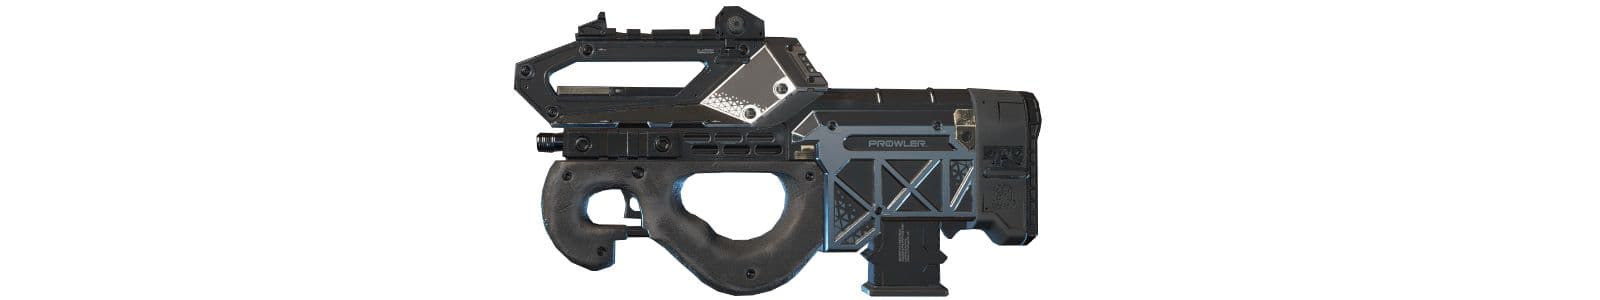 Prowler SMG